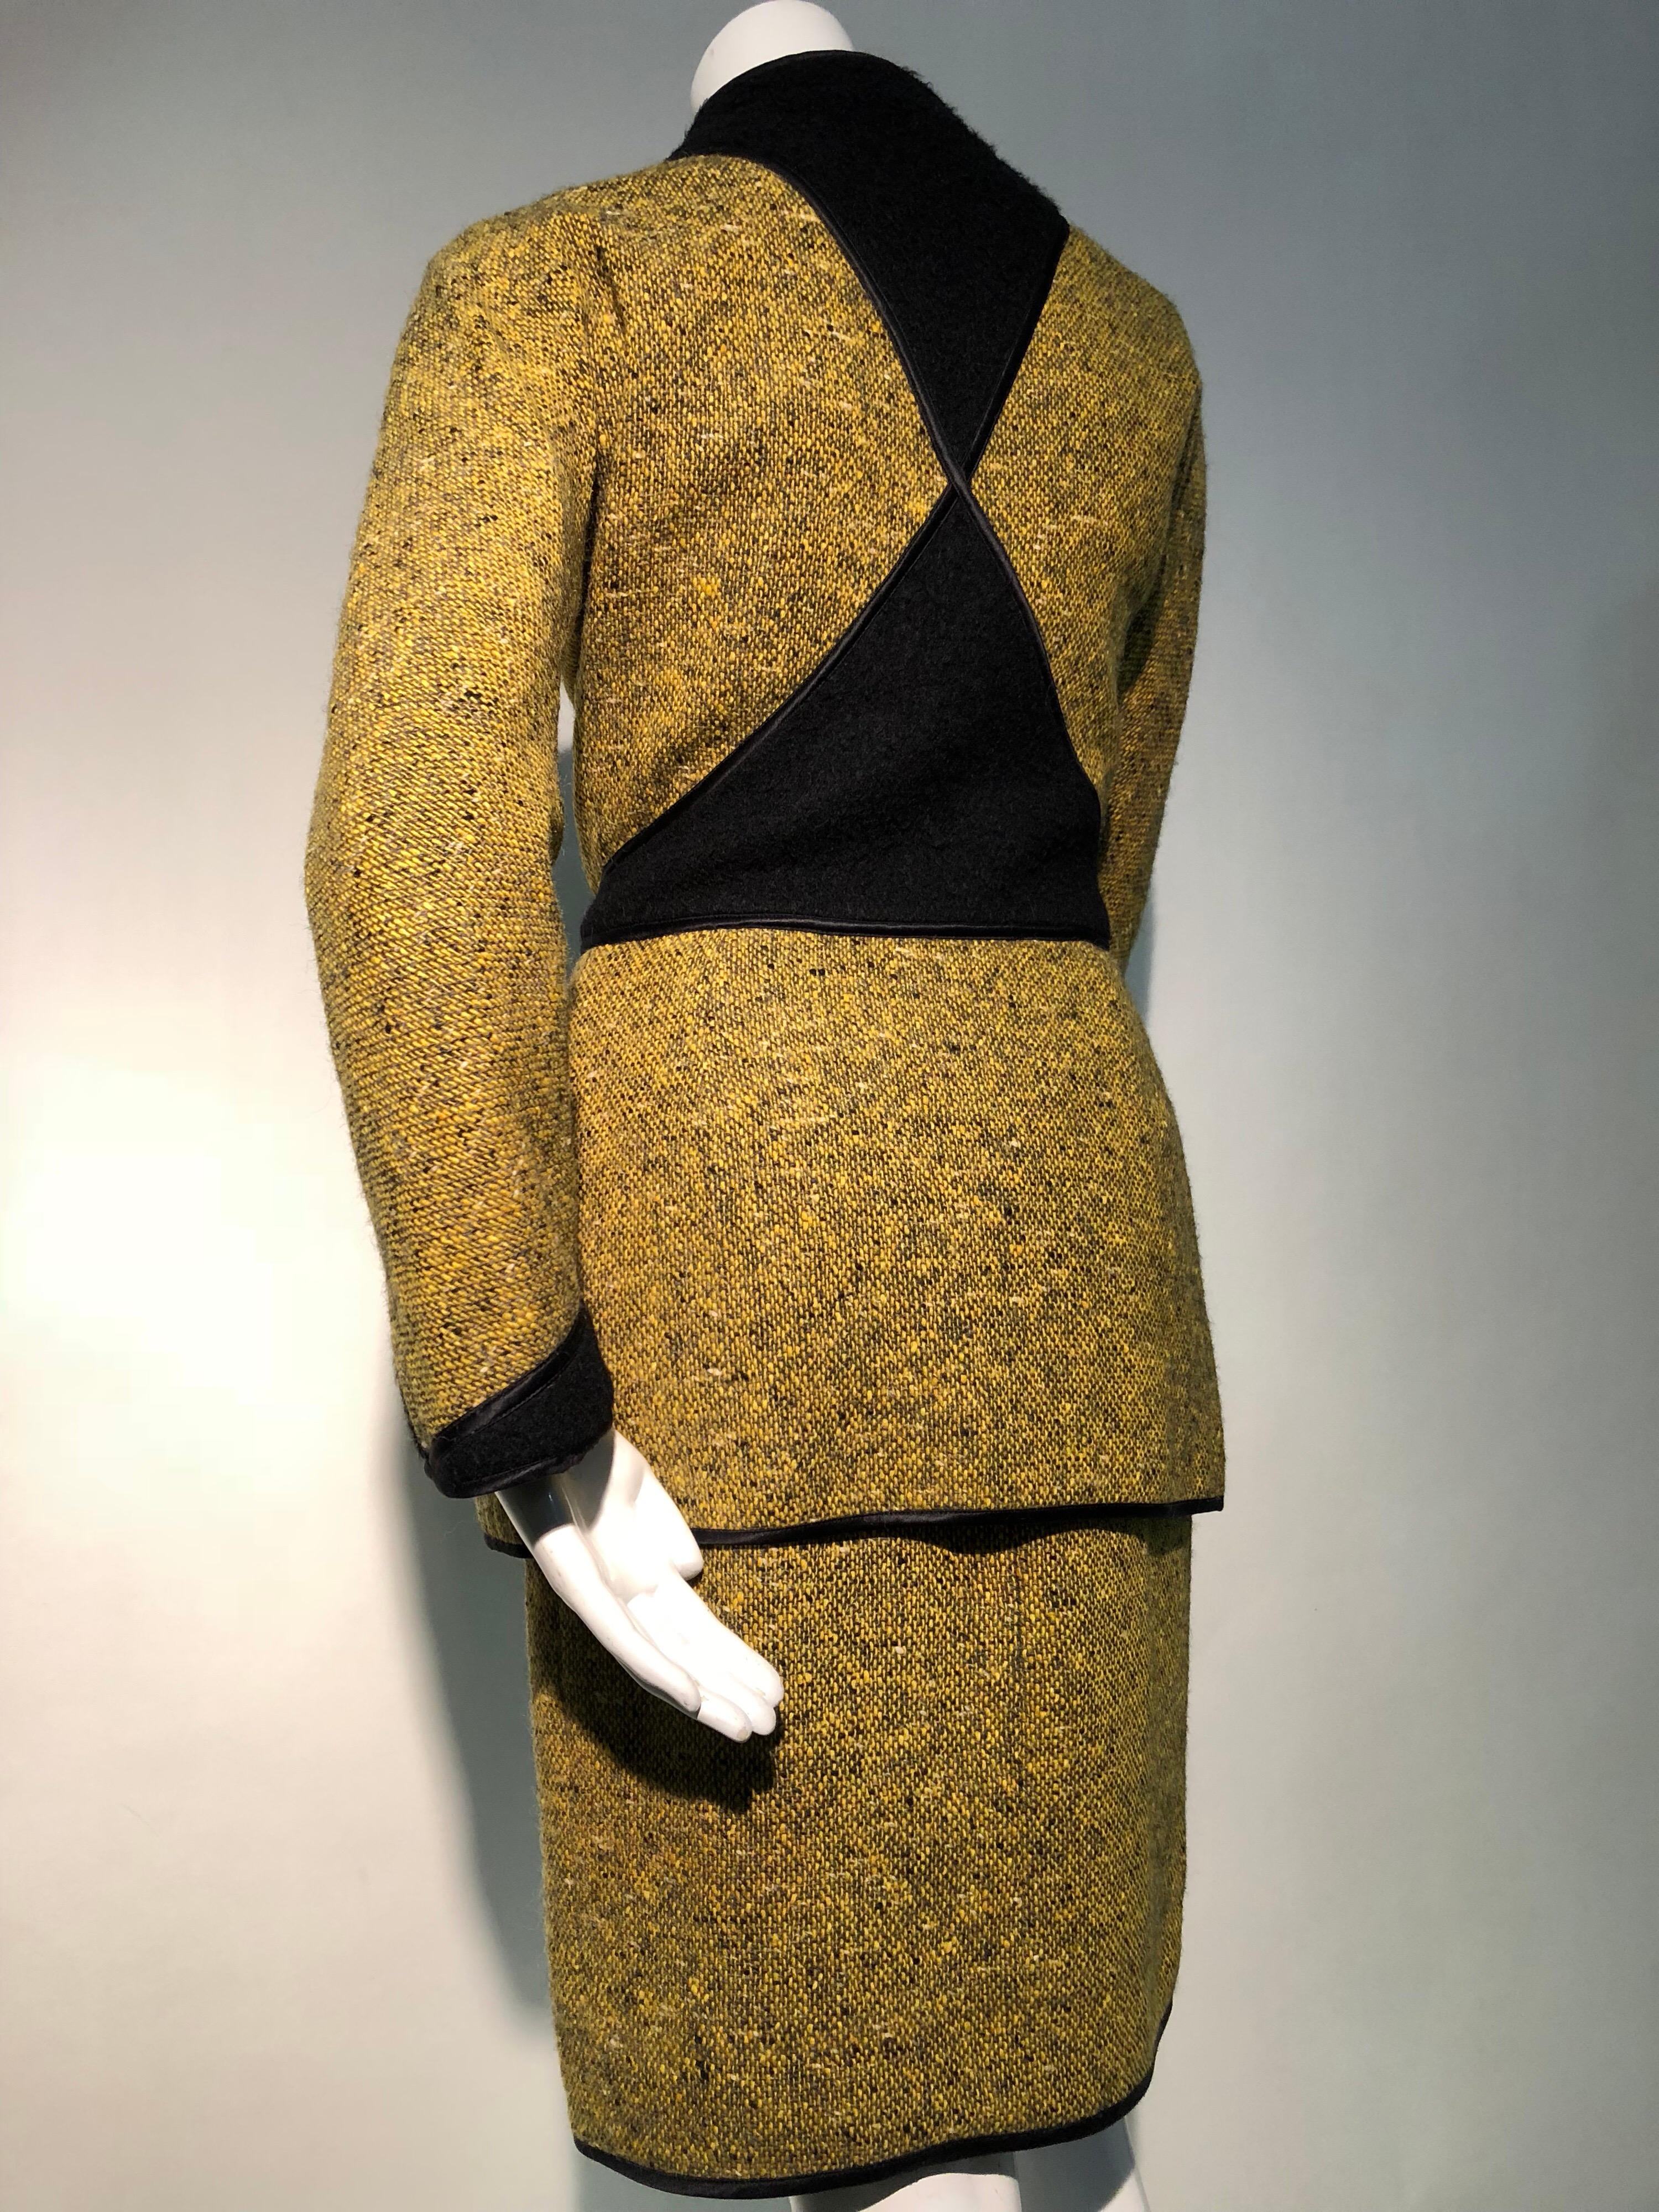 An exquisitely tailored, sleek 1990s Geoffrey Beene 2-piece ensemble in goldenrod and black tweed with geometric pieced panels of black wool and satin piping. The dress is a tweed skirt joined to a black wool blouse giving it the appearance of